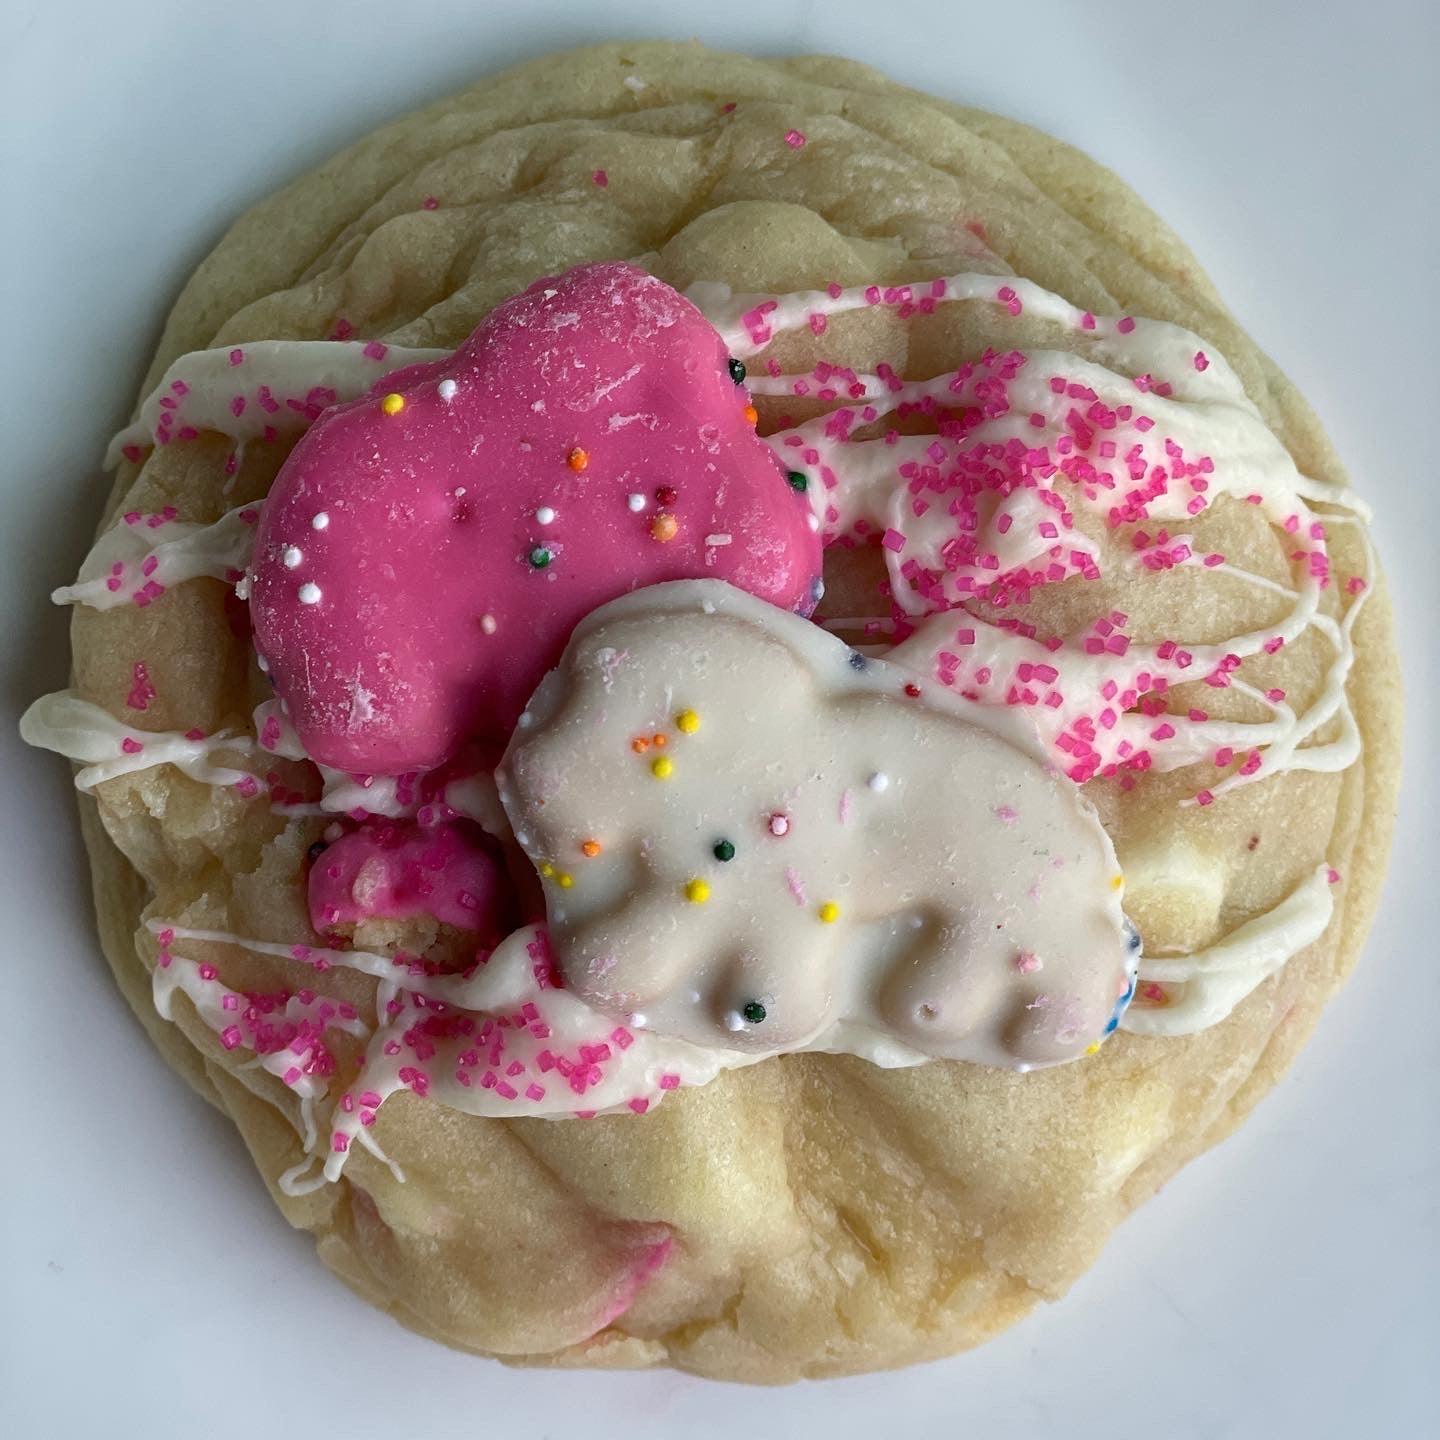 Ring Leader (Circus Animal/Frosted Sugar Cookie) - Stuff'd Pittsburgh